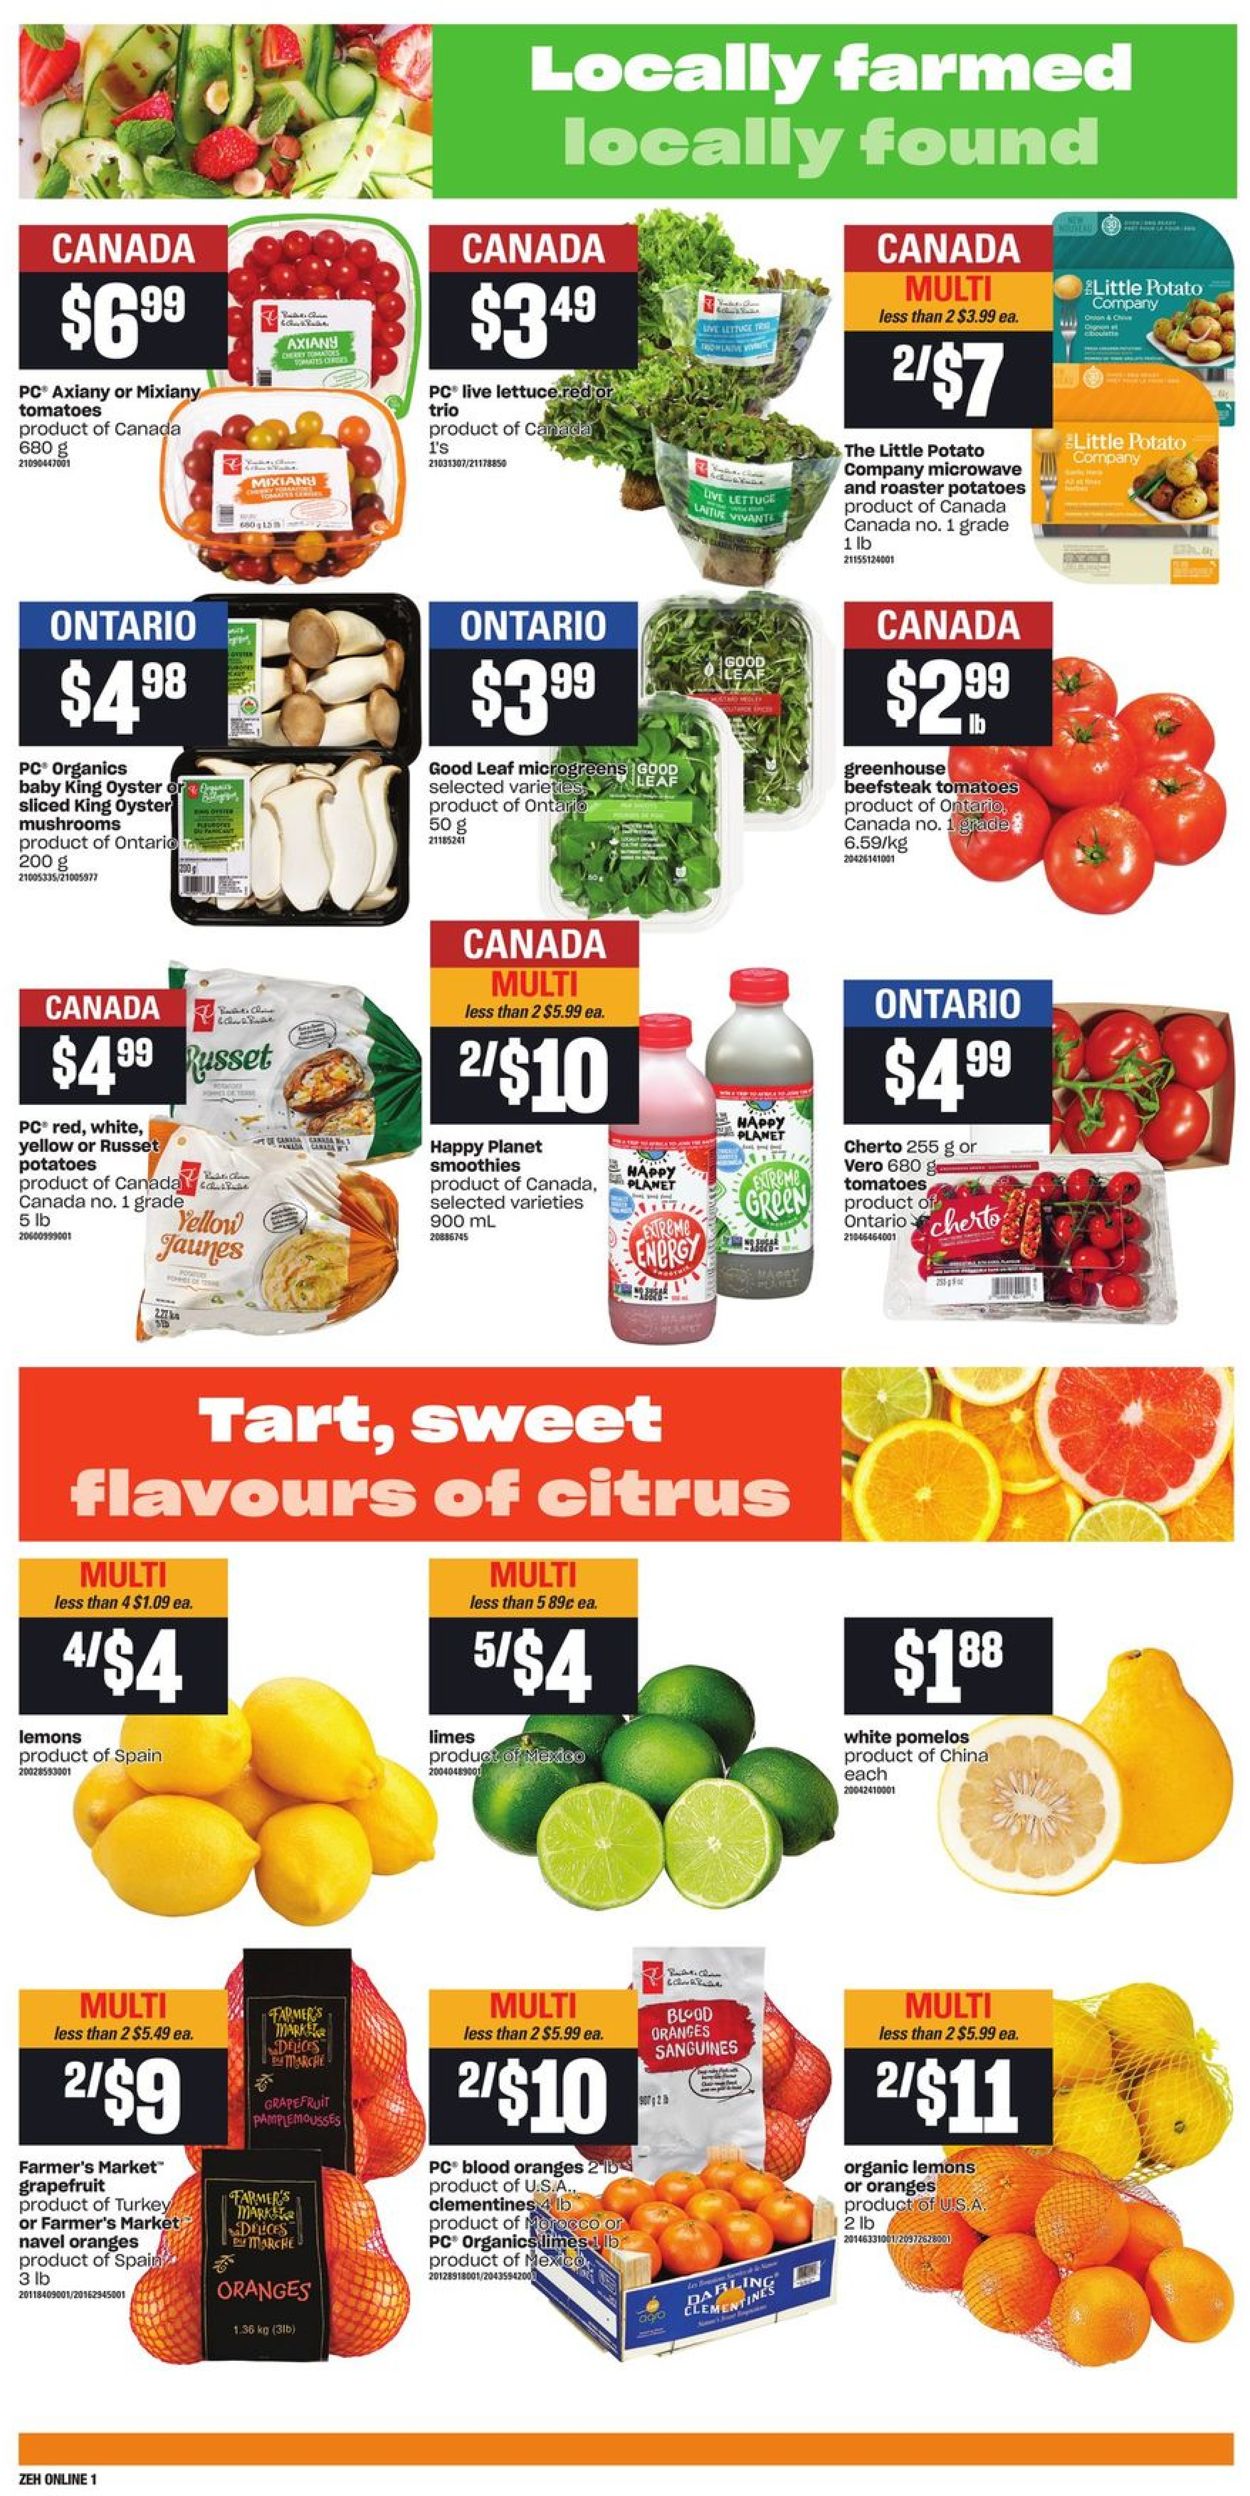 Zehrs Flyer from 01/28/2021